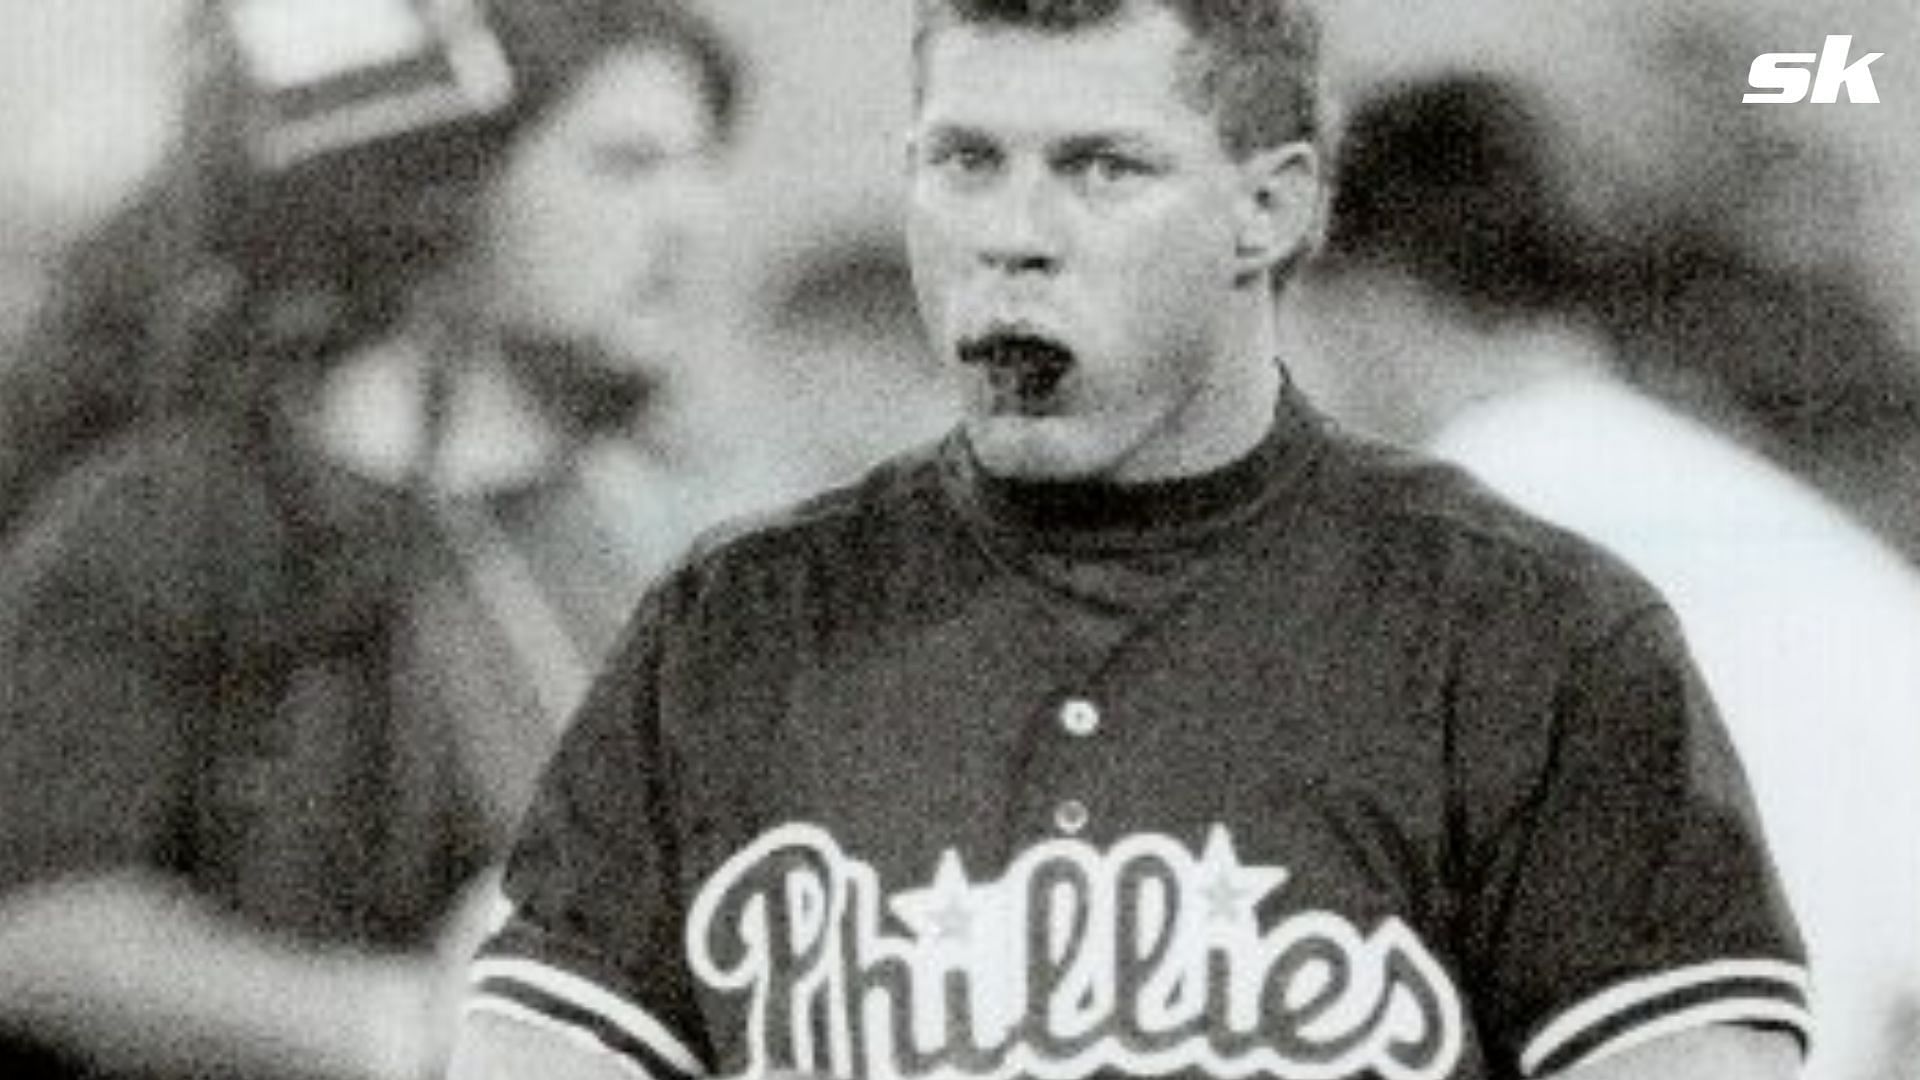 When Lenny Dykstra admitted to blackmailing Umpires by sending PIs after them